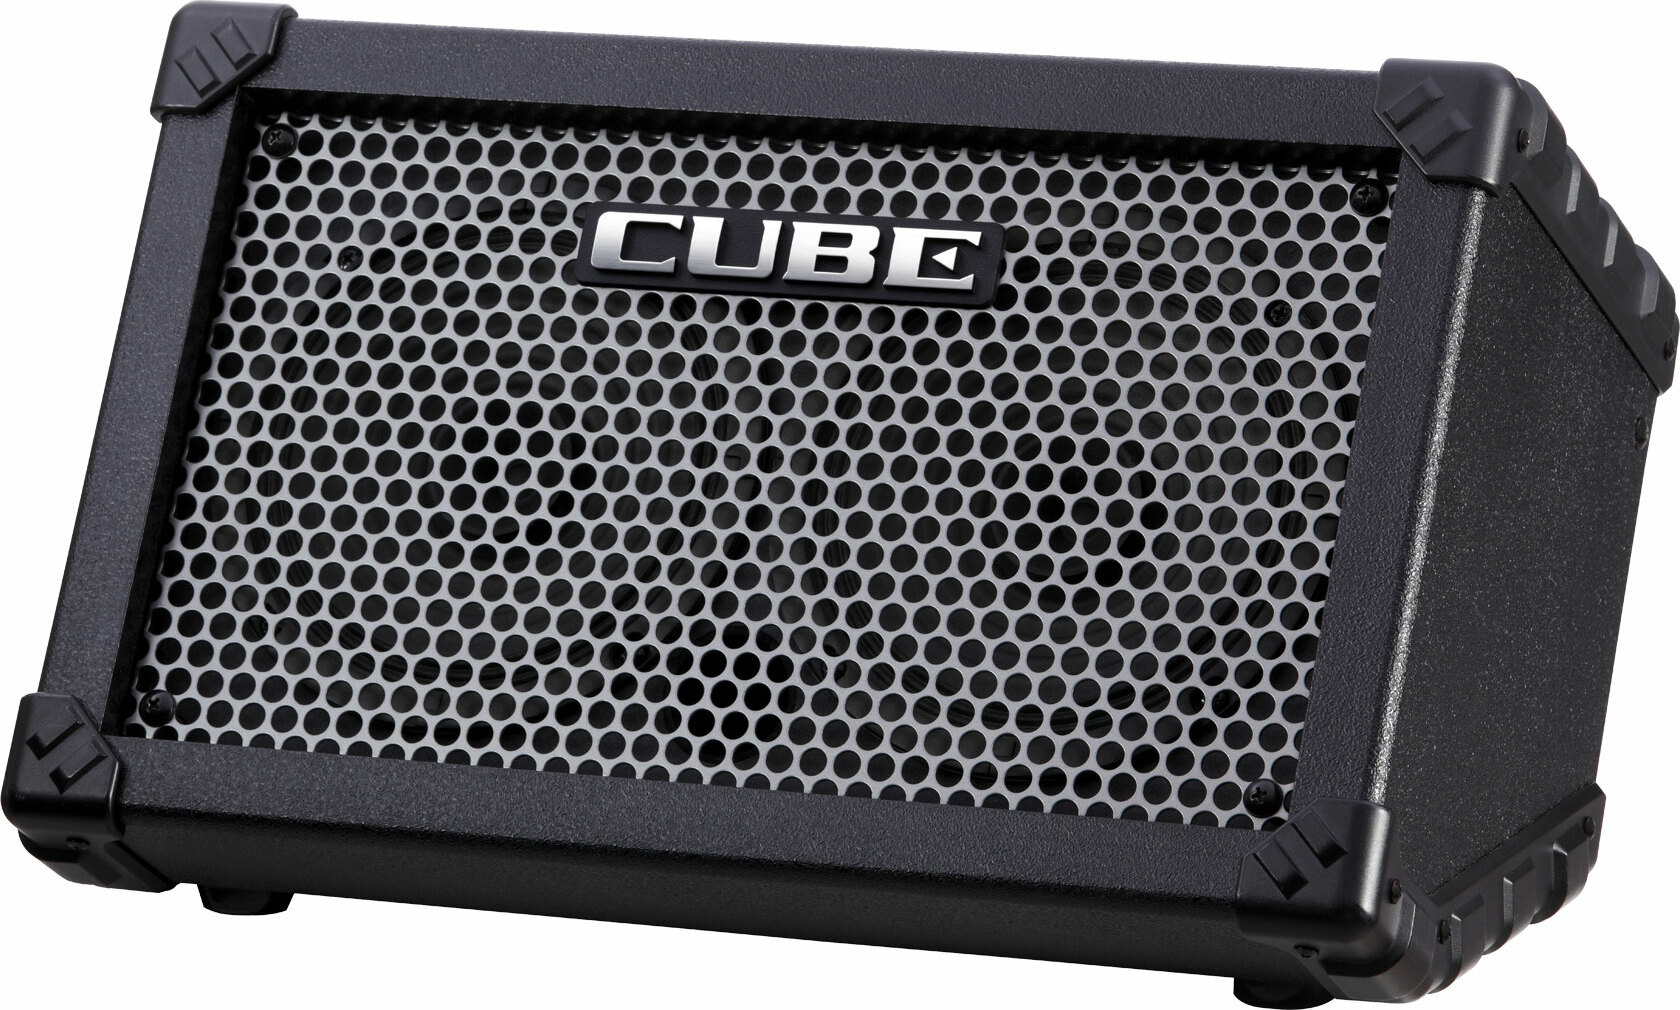 Roland Cube Street Battery Stereo Amplifier 2x25w 2x8 Black - Electric guitar combo amp - Main picture